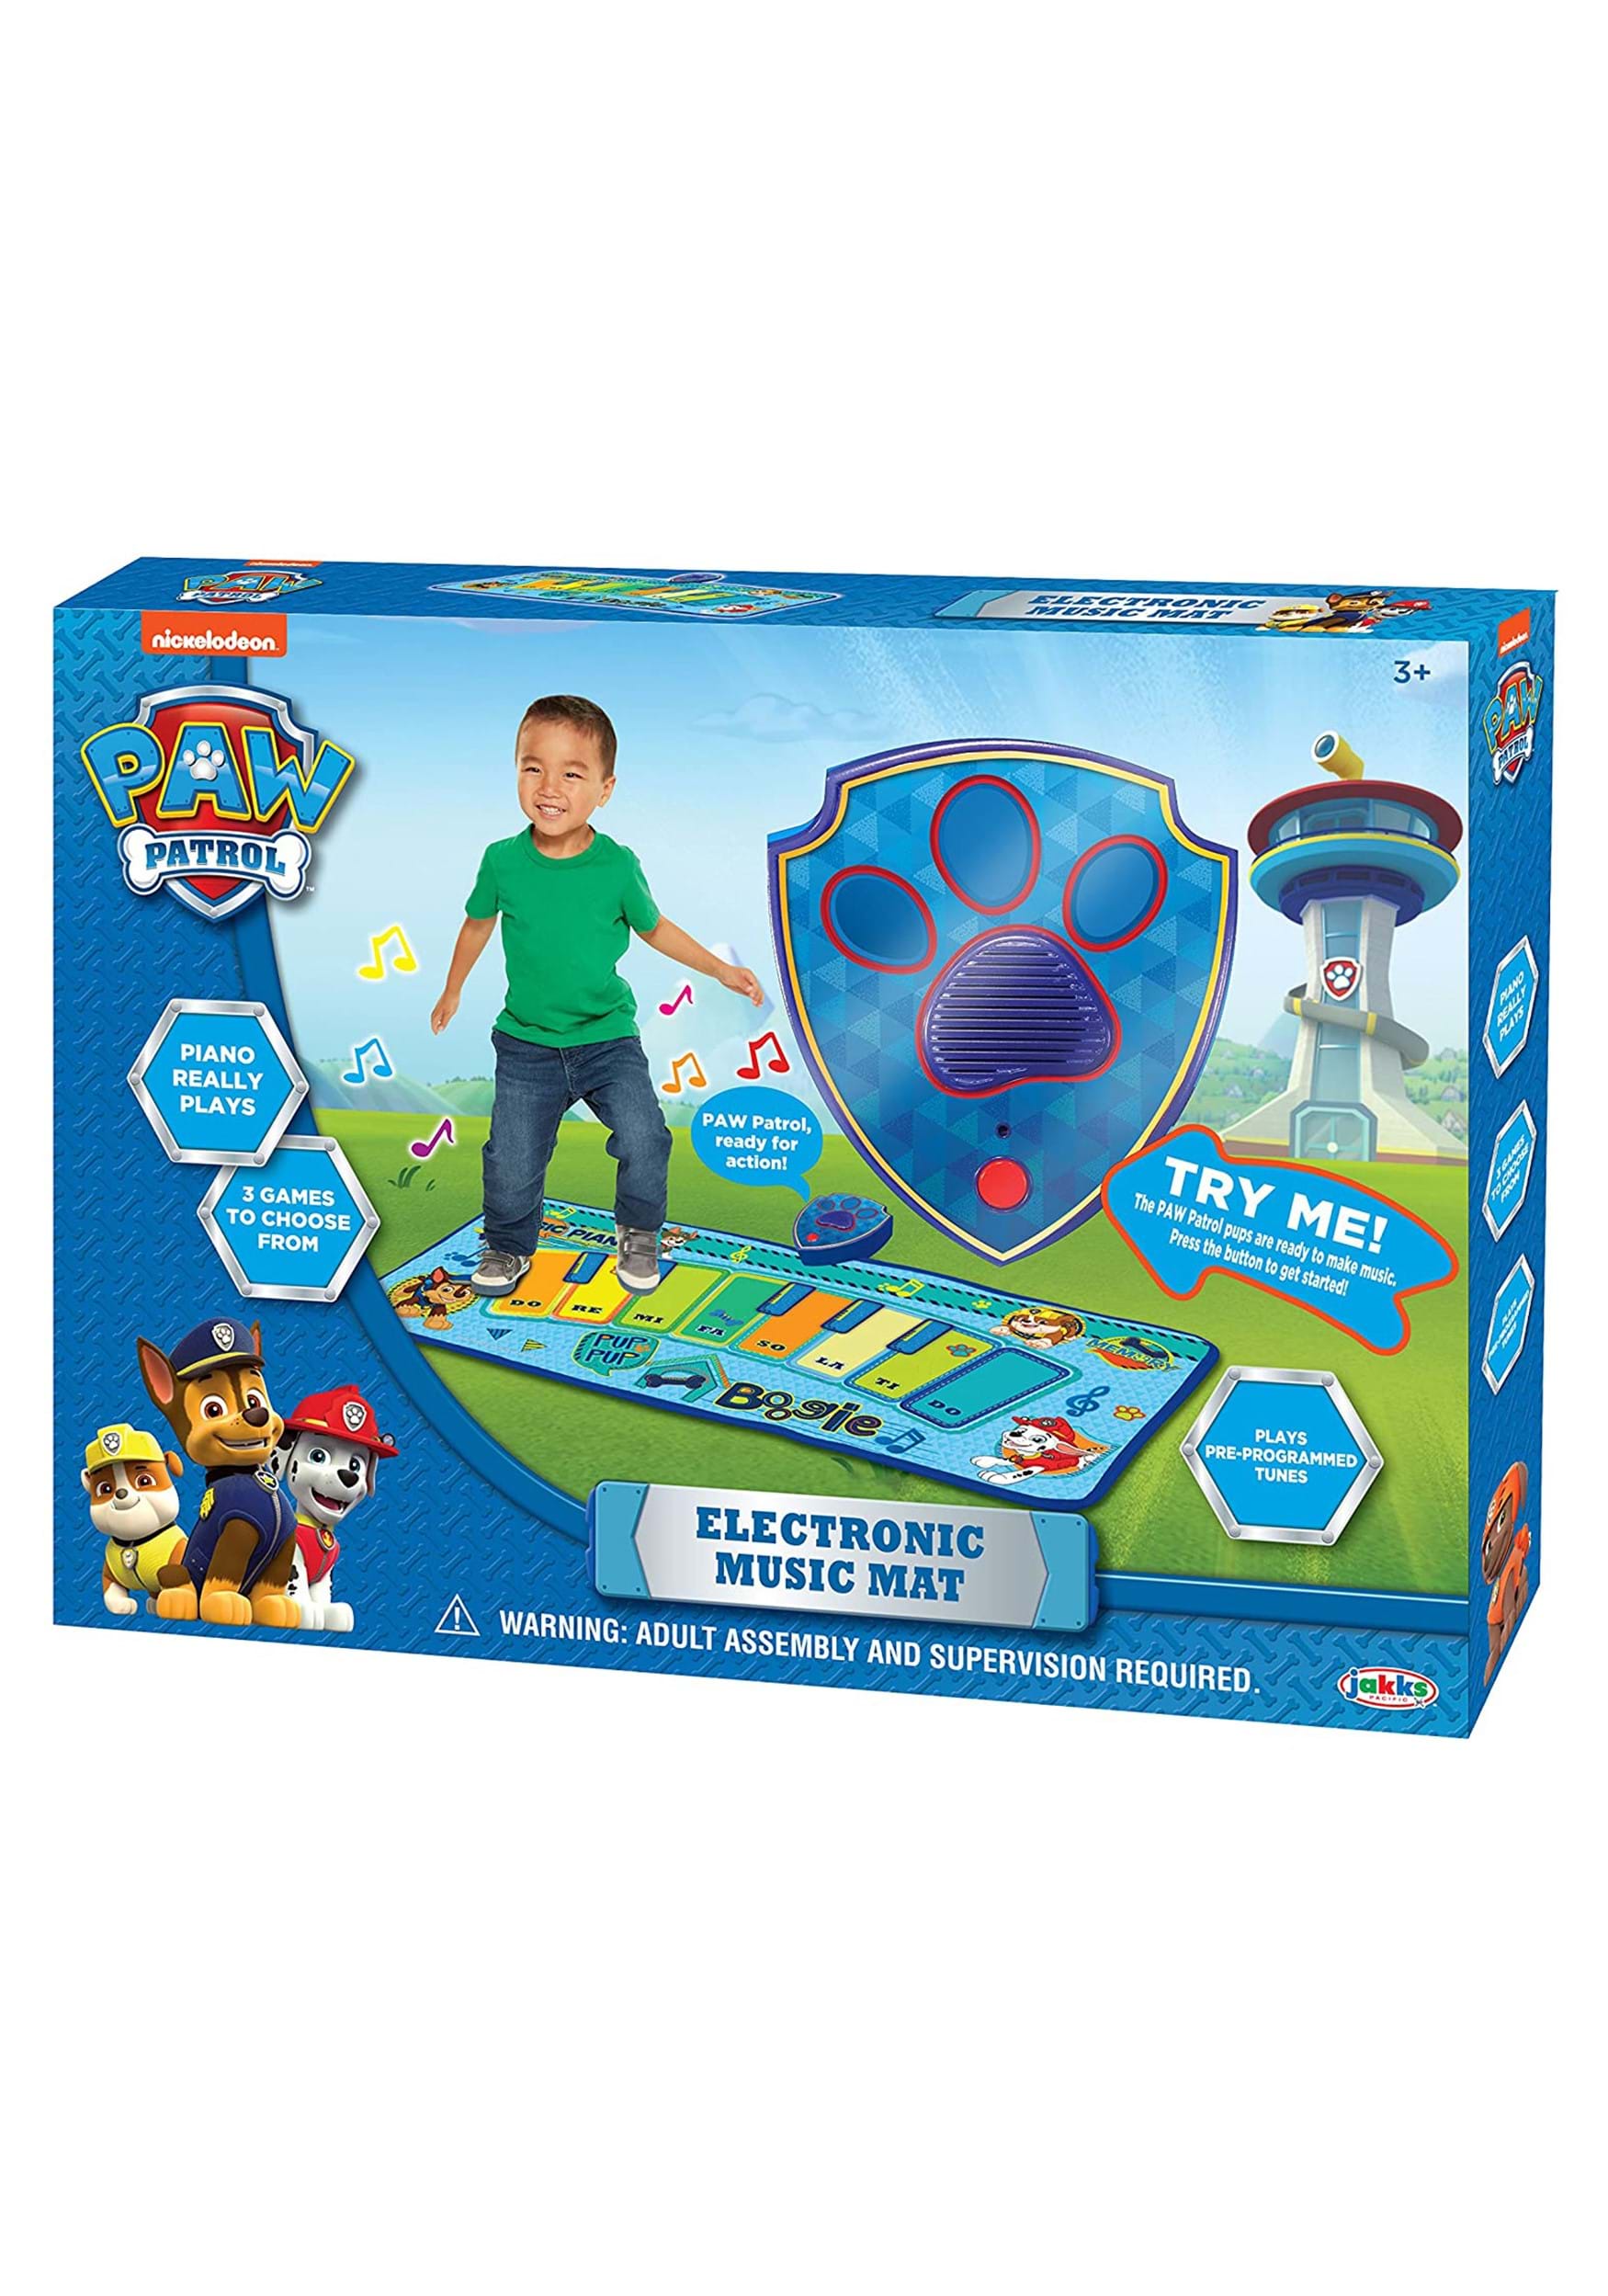 Music Mat with 3 Modes from Paw Patrol